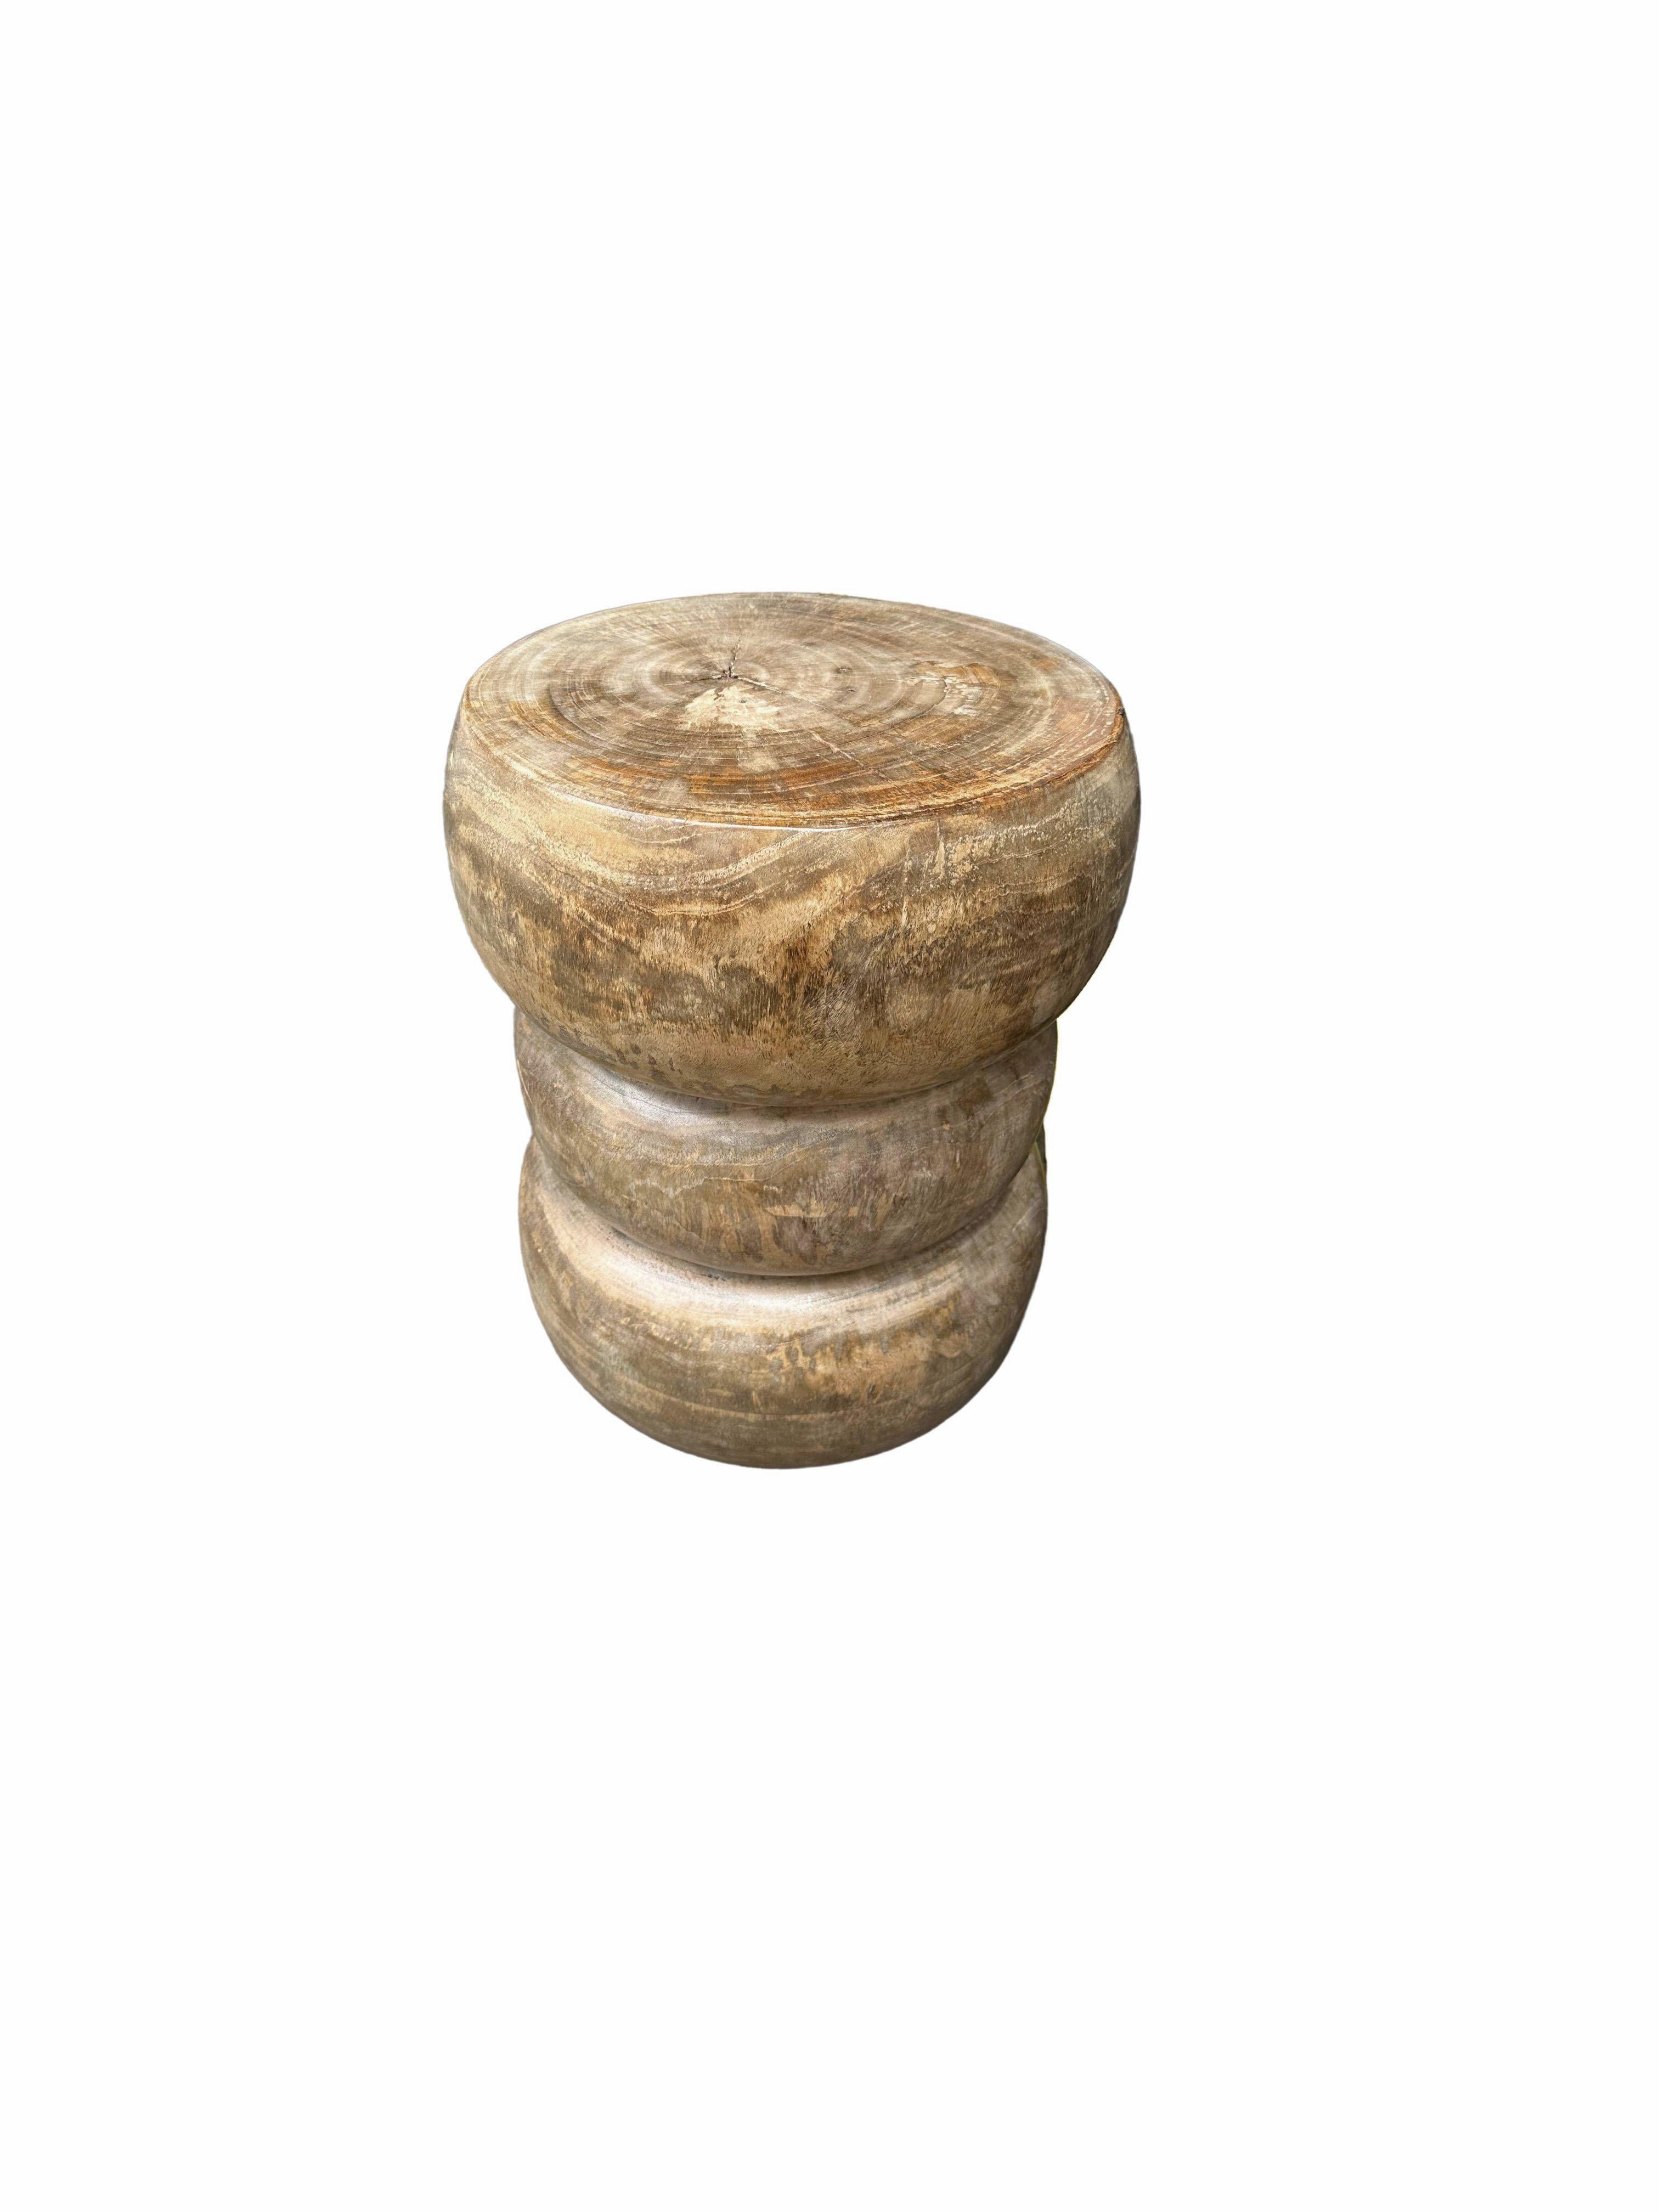 A wonderfully sculptural side table crafted from solid mango wood. It features a natural finish where the exterior was sanded and smoothed. The table features a wonderful mix of wood textures and shades. The perfect object to bring warmth to any